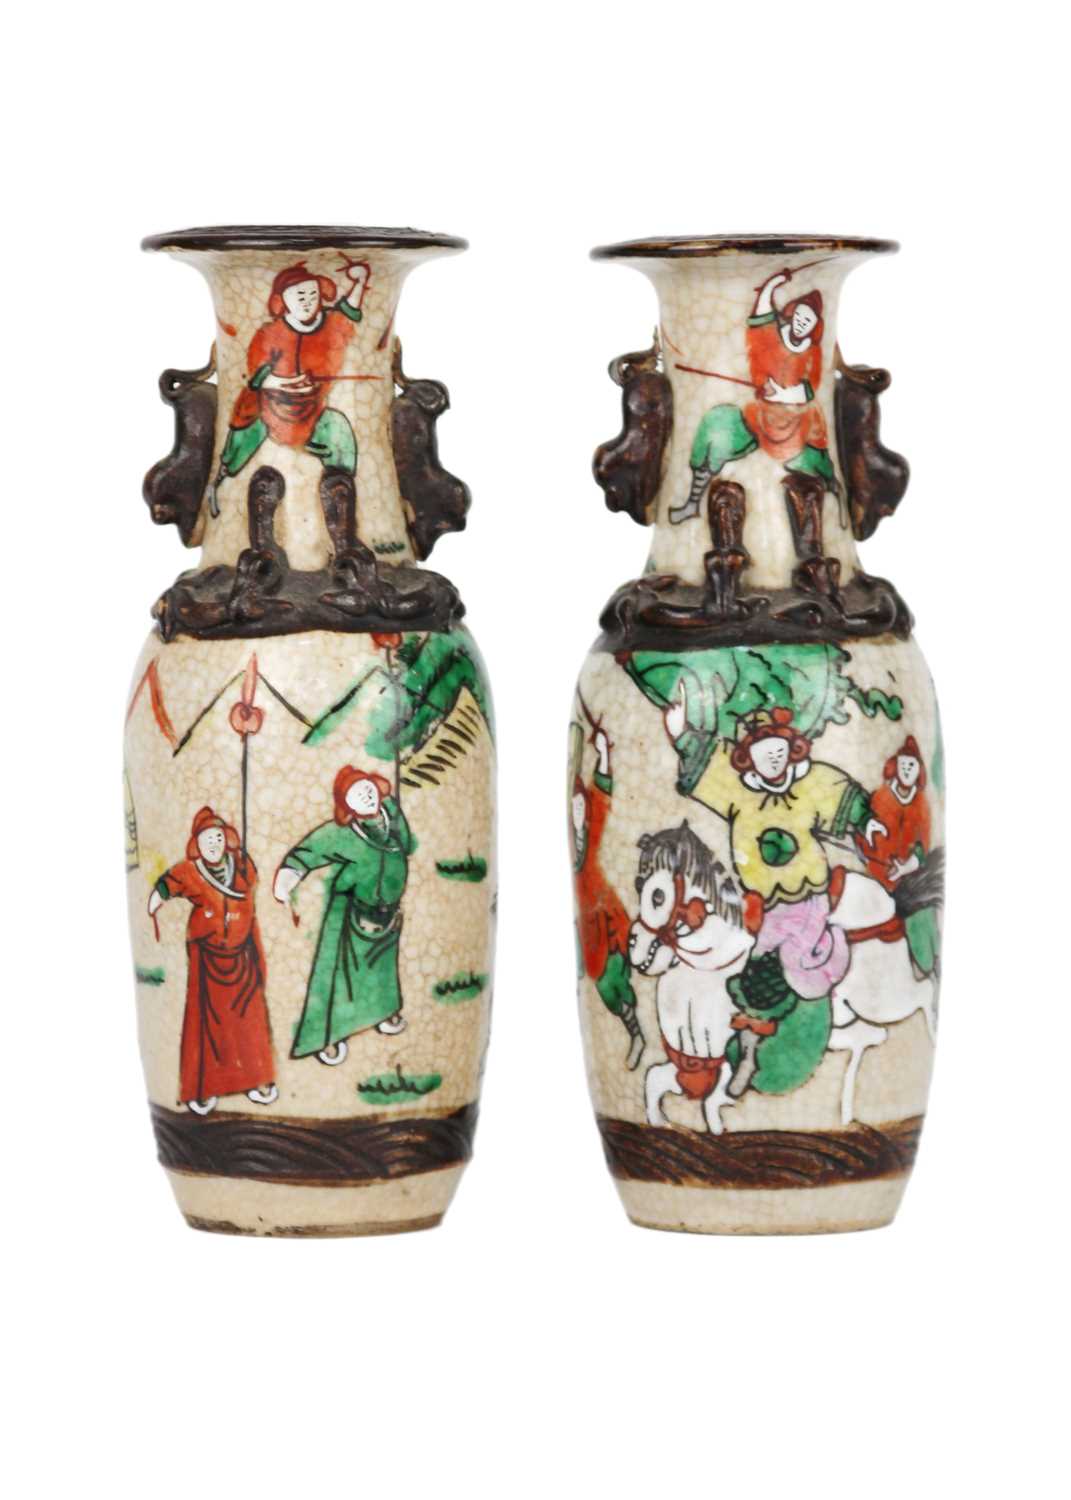 A pair of Chinese crackle glazed vases, 19th century. - Image 3 of 6